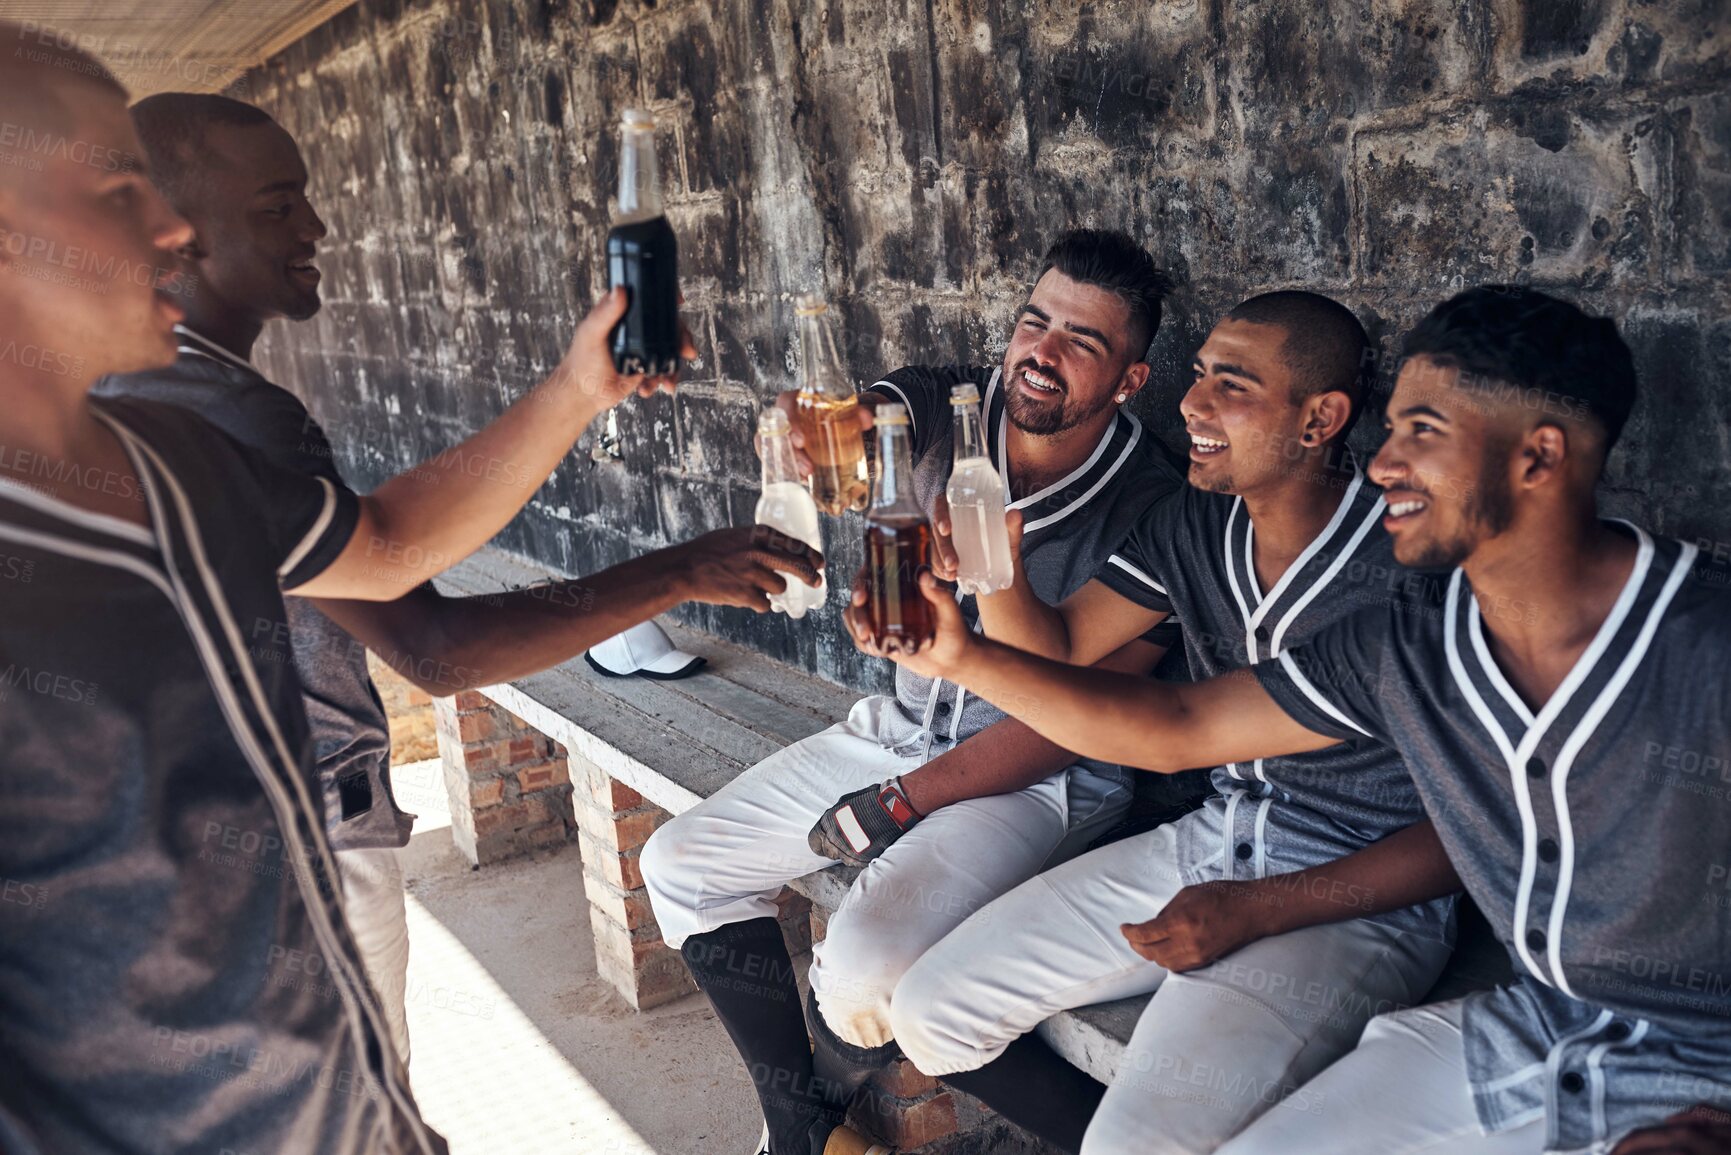 Buy stock photo Shot of a group of young men celebrating with drinks after playing a baseball game